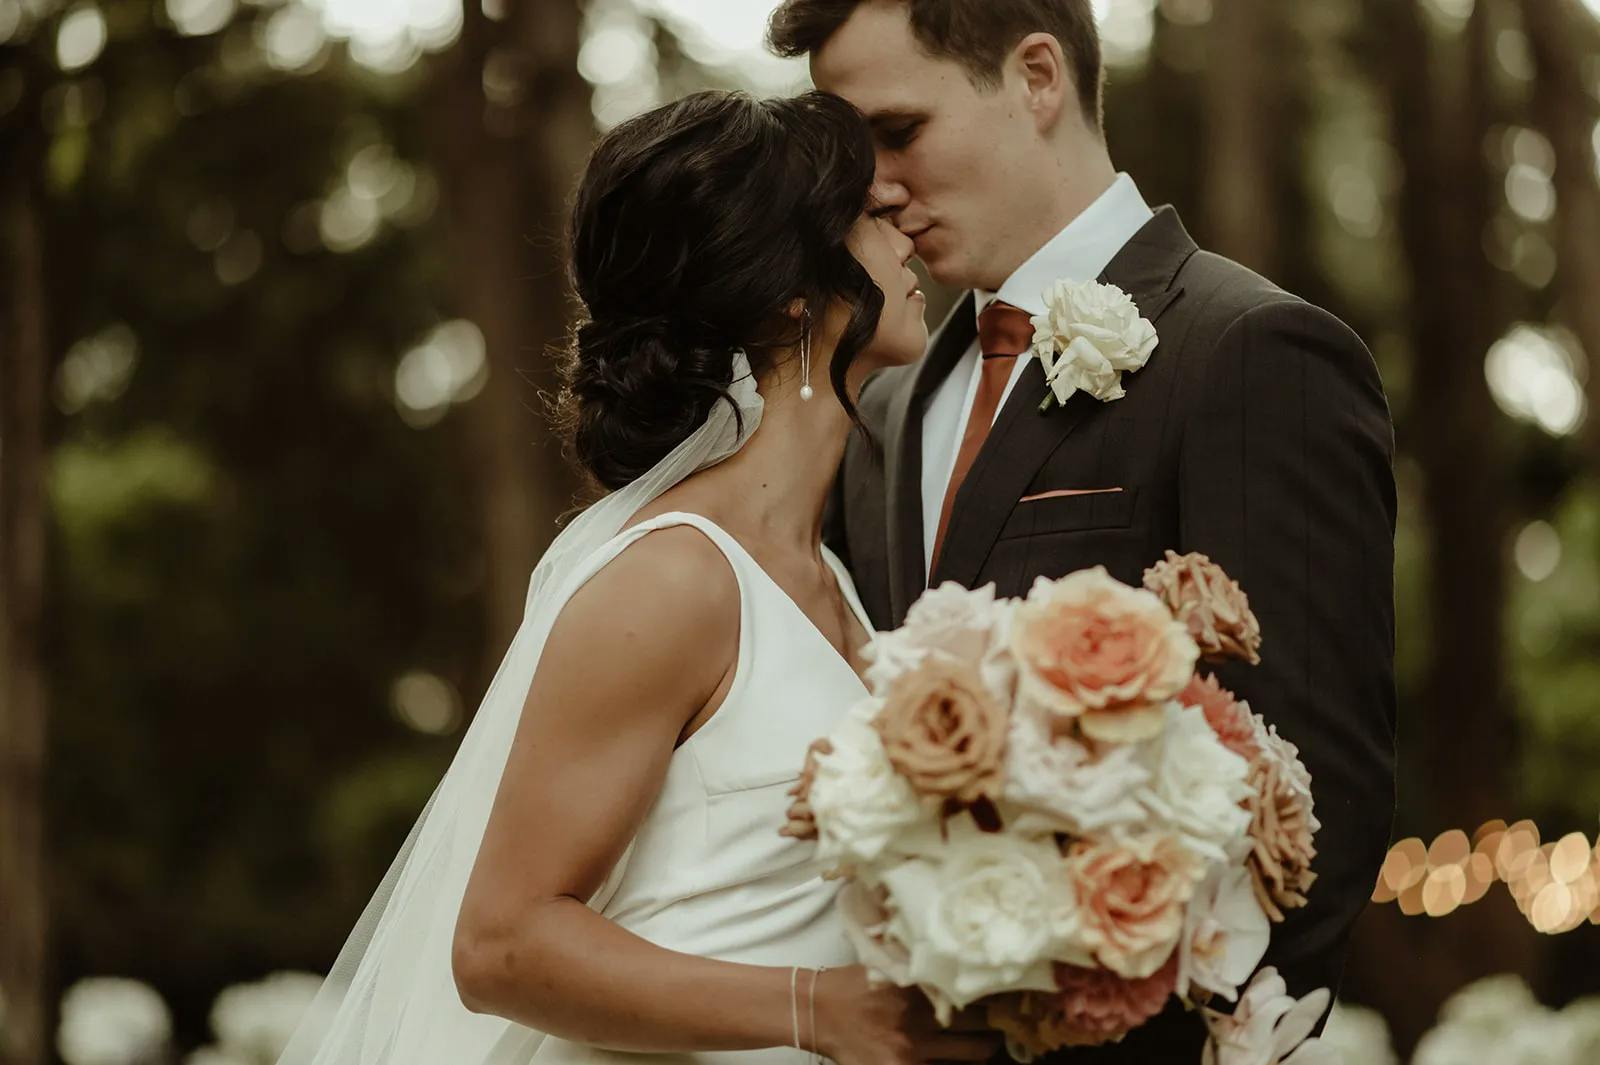 A bride and groom embrace tenderly in a wooded outdoor setting. The bride wears a white dress and holds a large bouquet of pink, peach, and white flowers. The groom, in a dark suit with a white rose boutonniere, gently kisses the bride on the forehead.